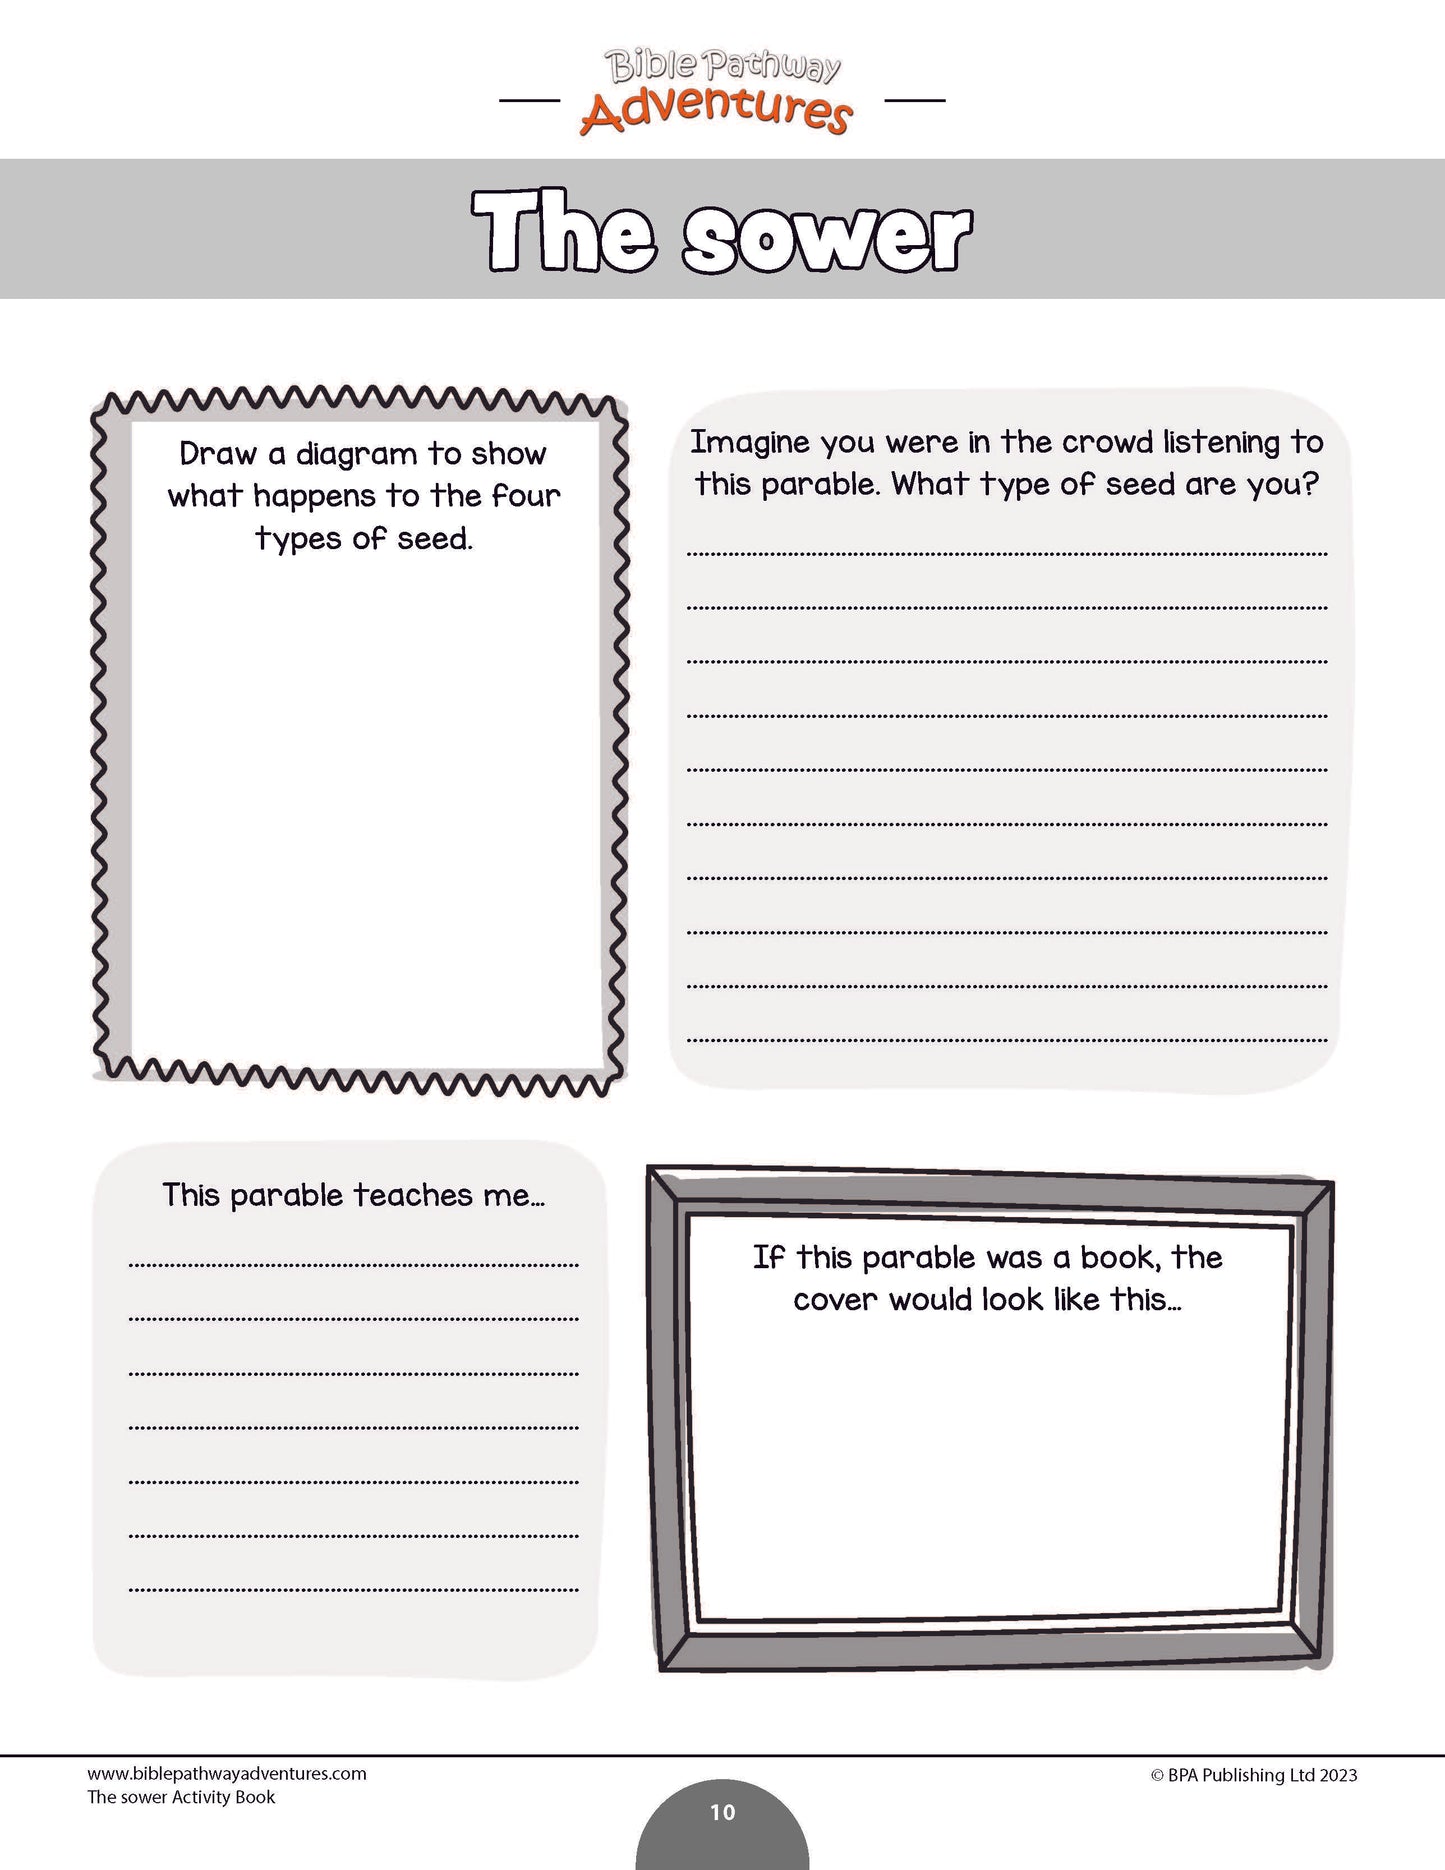 Parable of the Sower Activity Book (PDF)